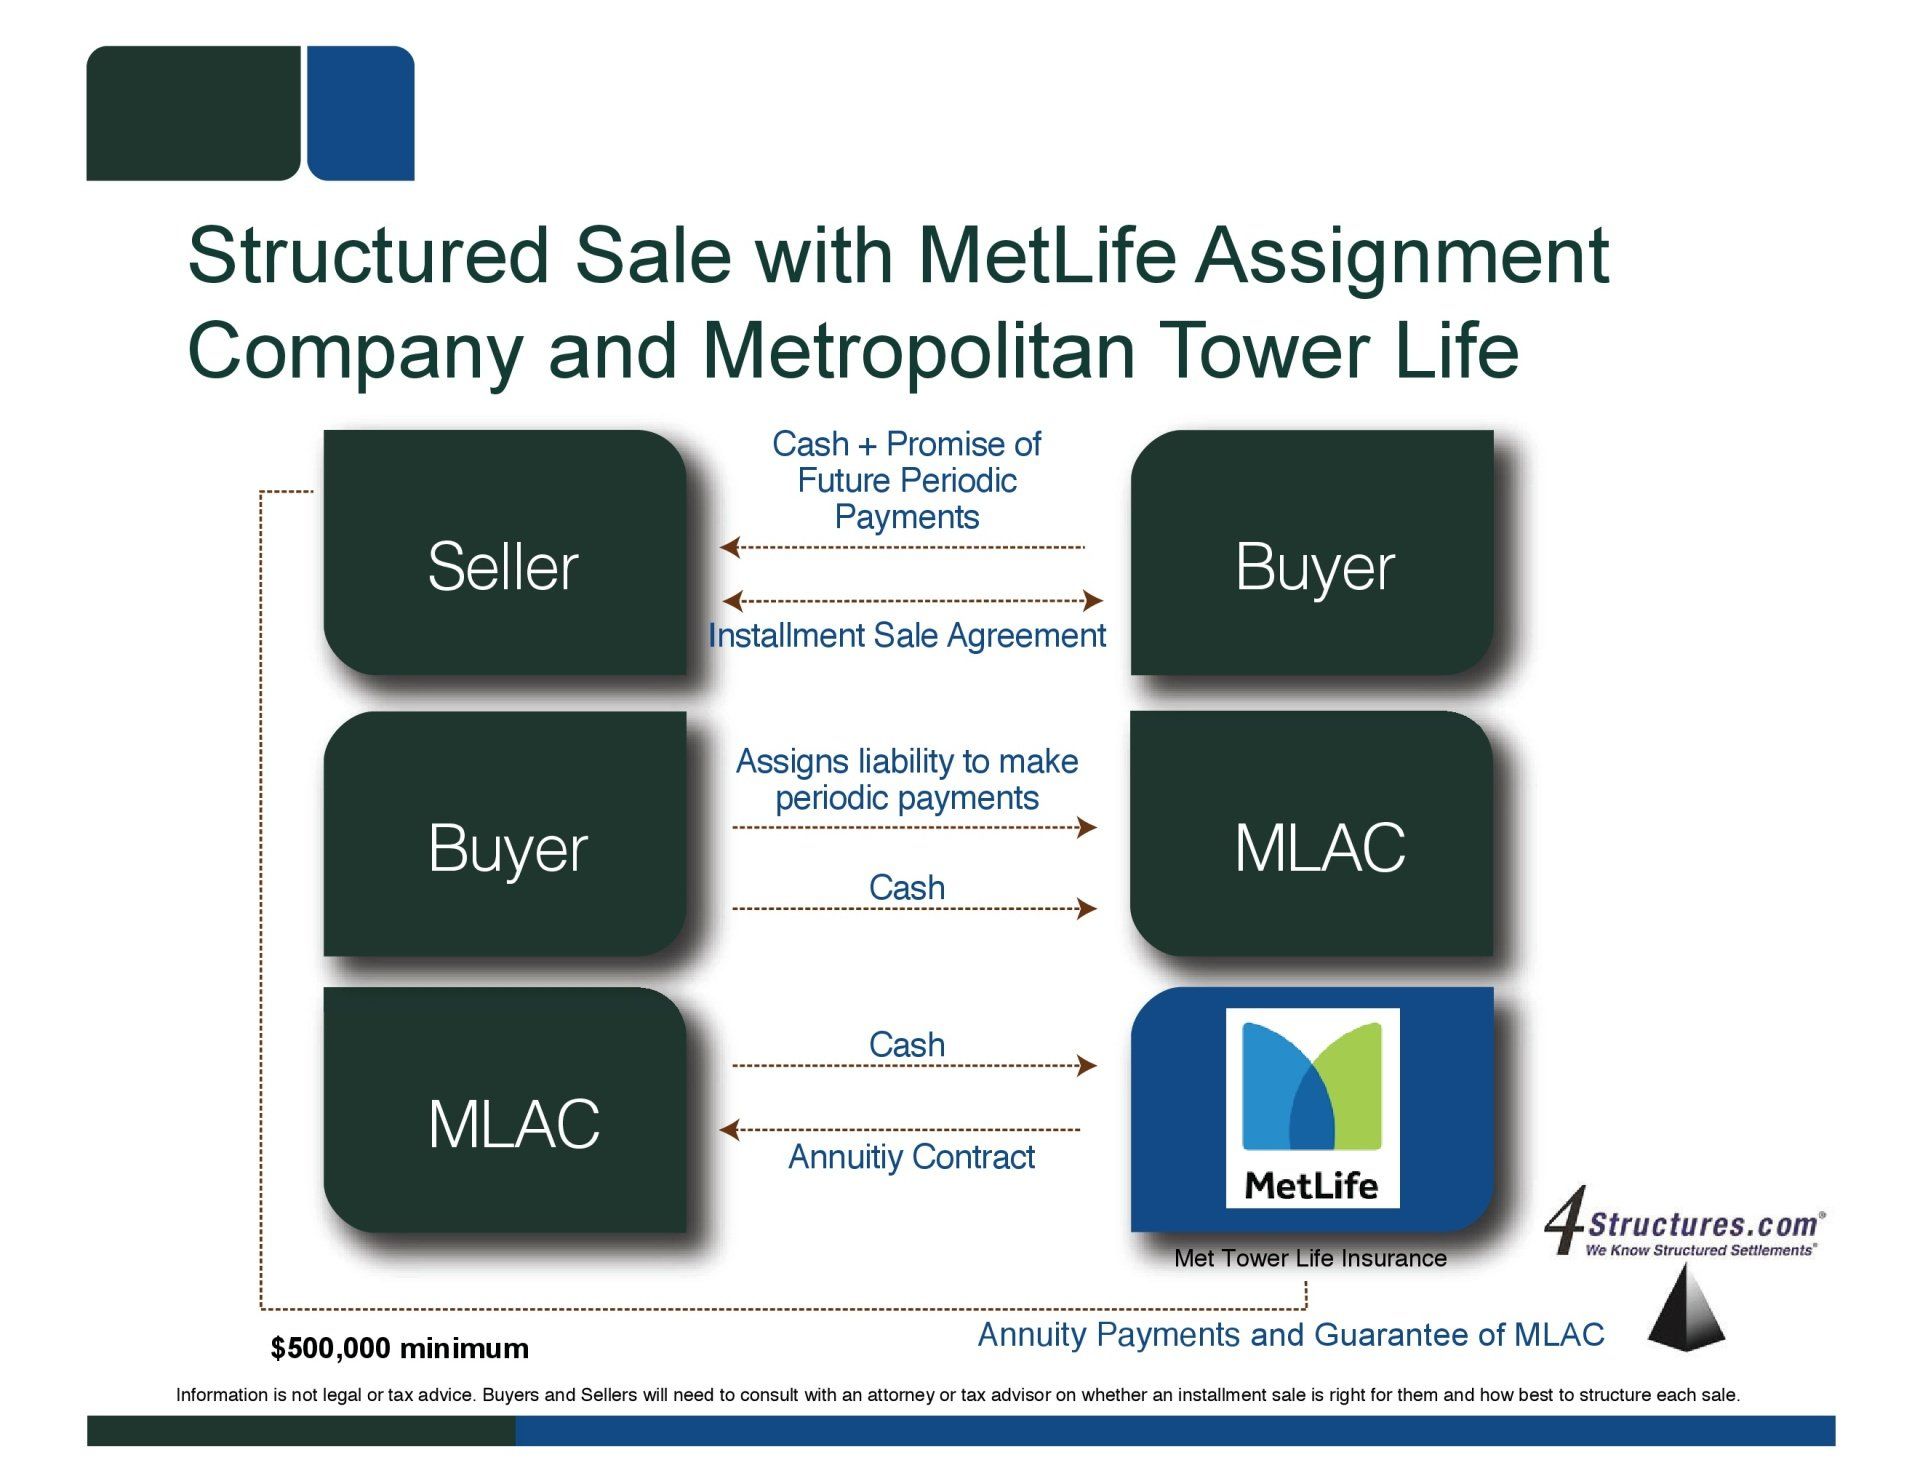 How Does Structured Sale Work